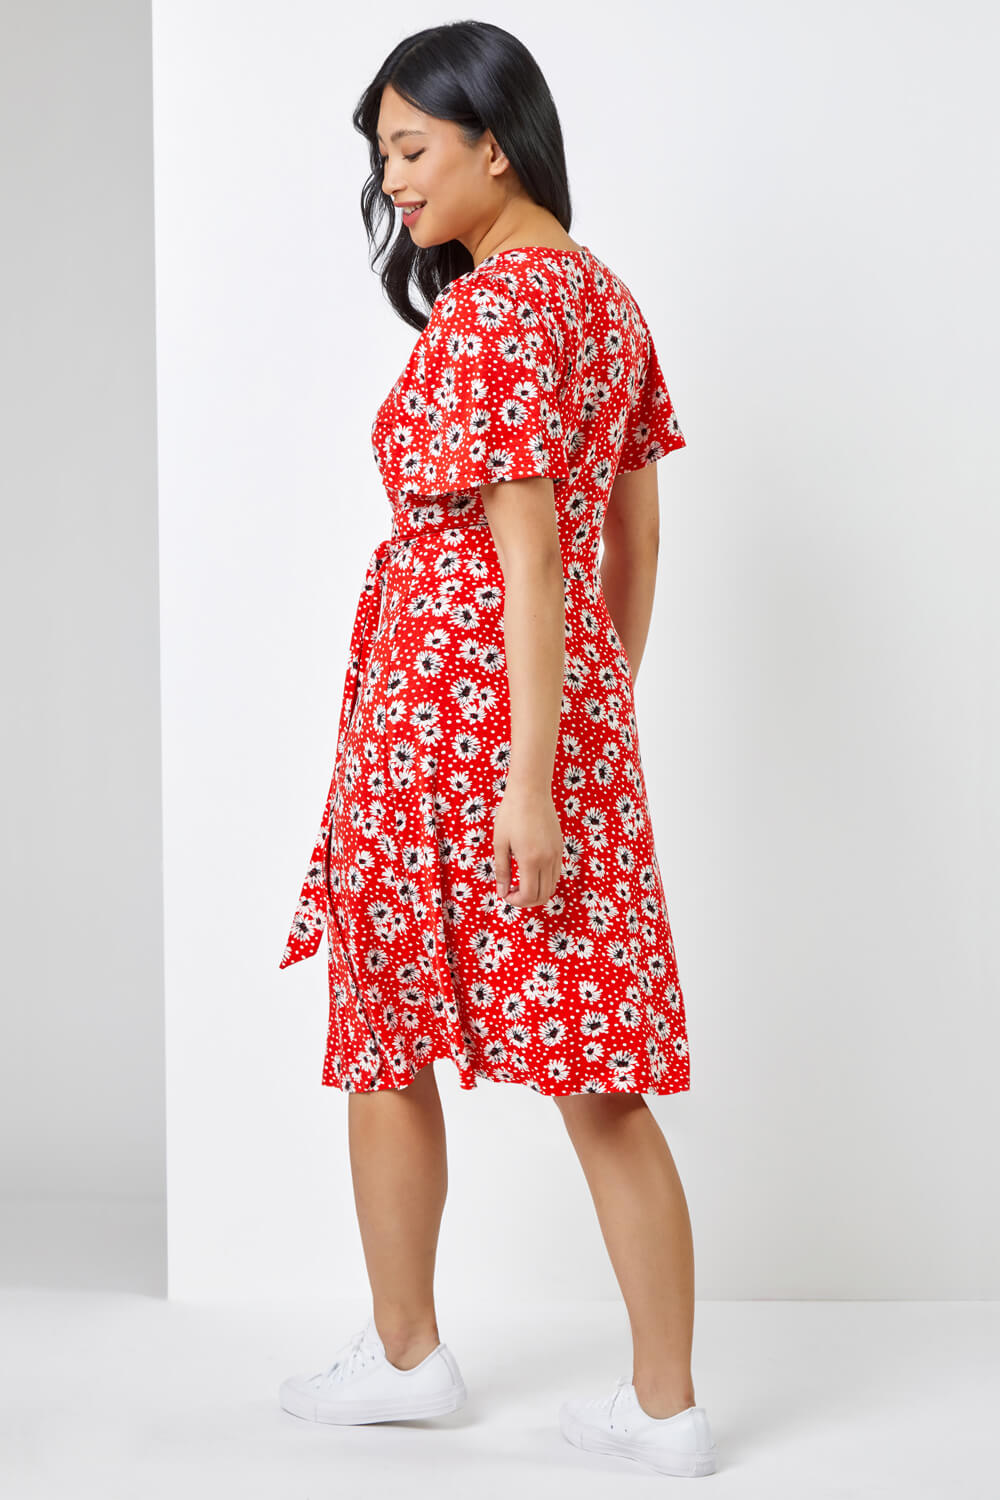 Red Petite Floral Print Jersey Dress, Image 2 of 5